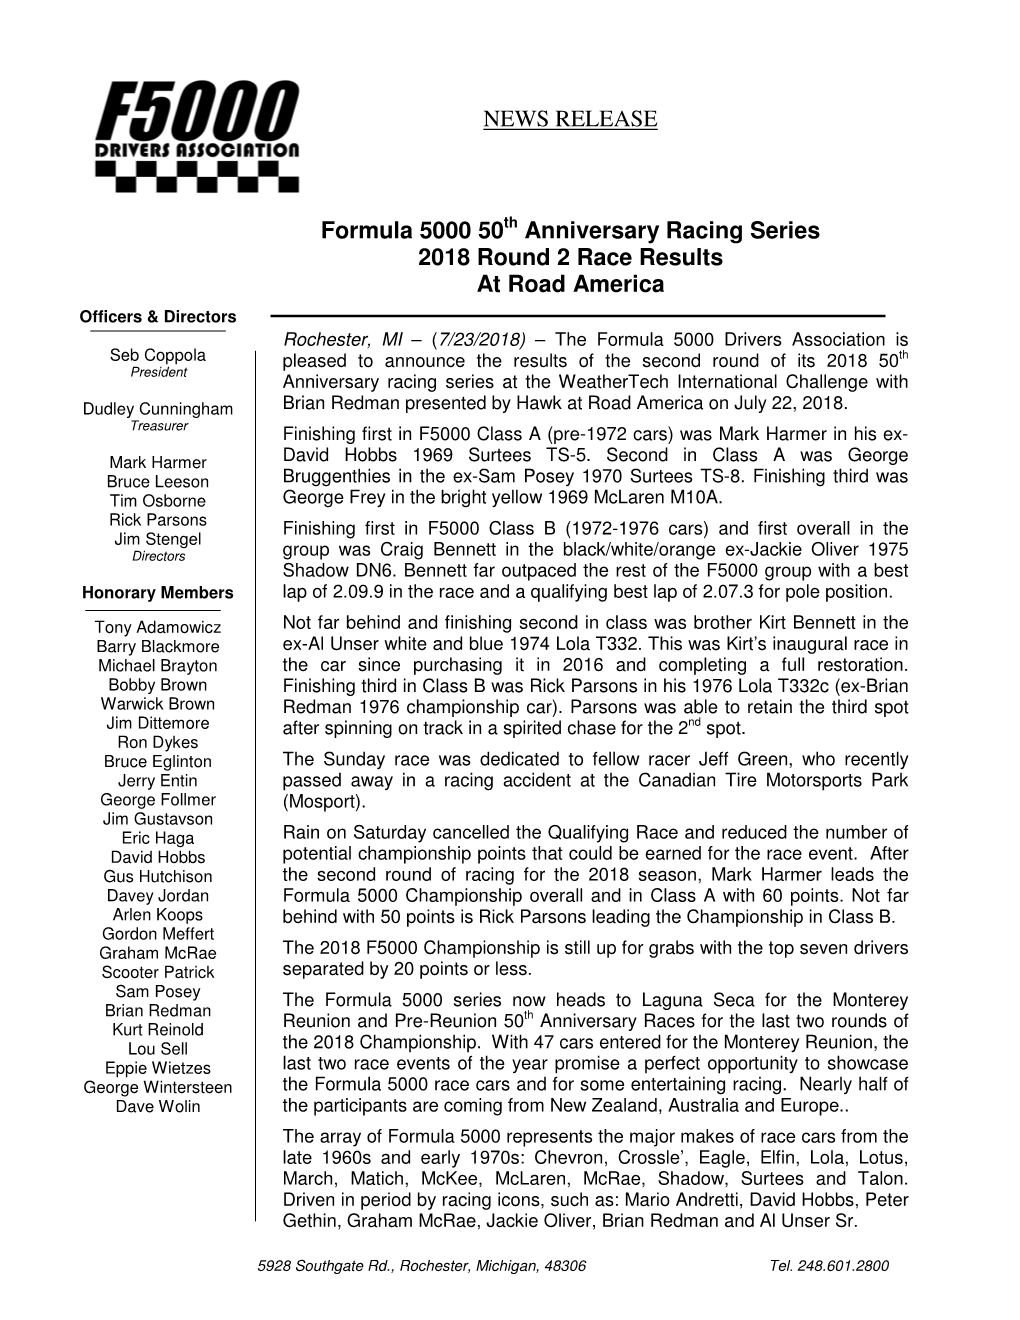 Anniversary Racing Series 2018 Round 2 Race Results at Road America